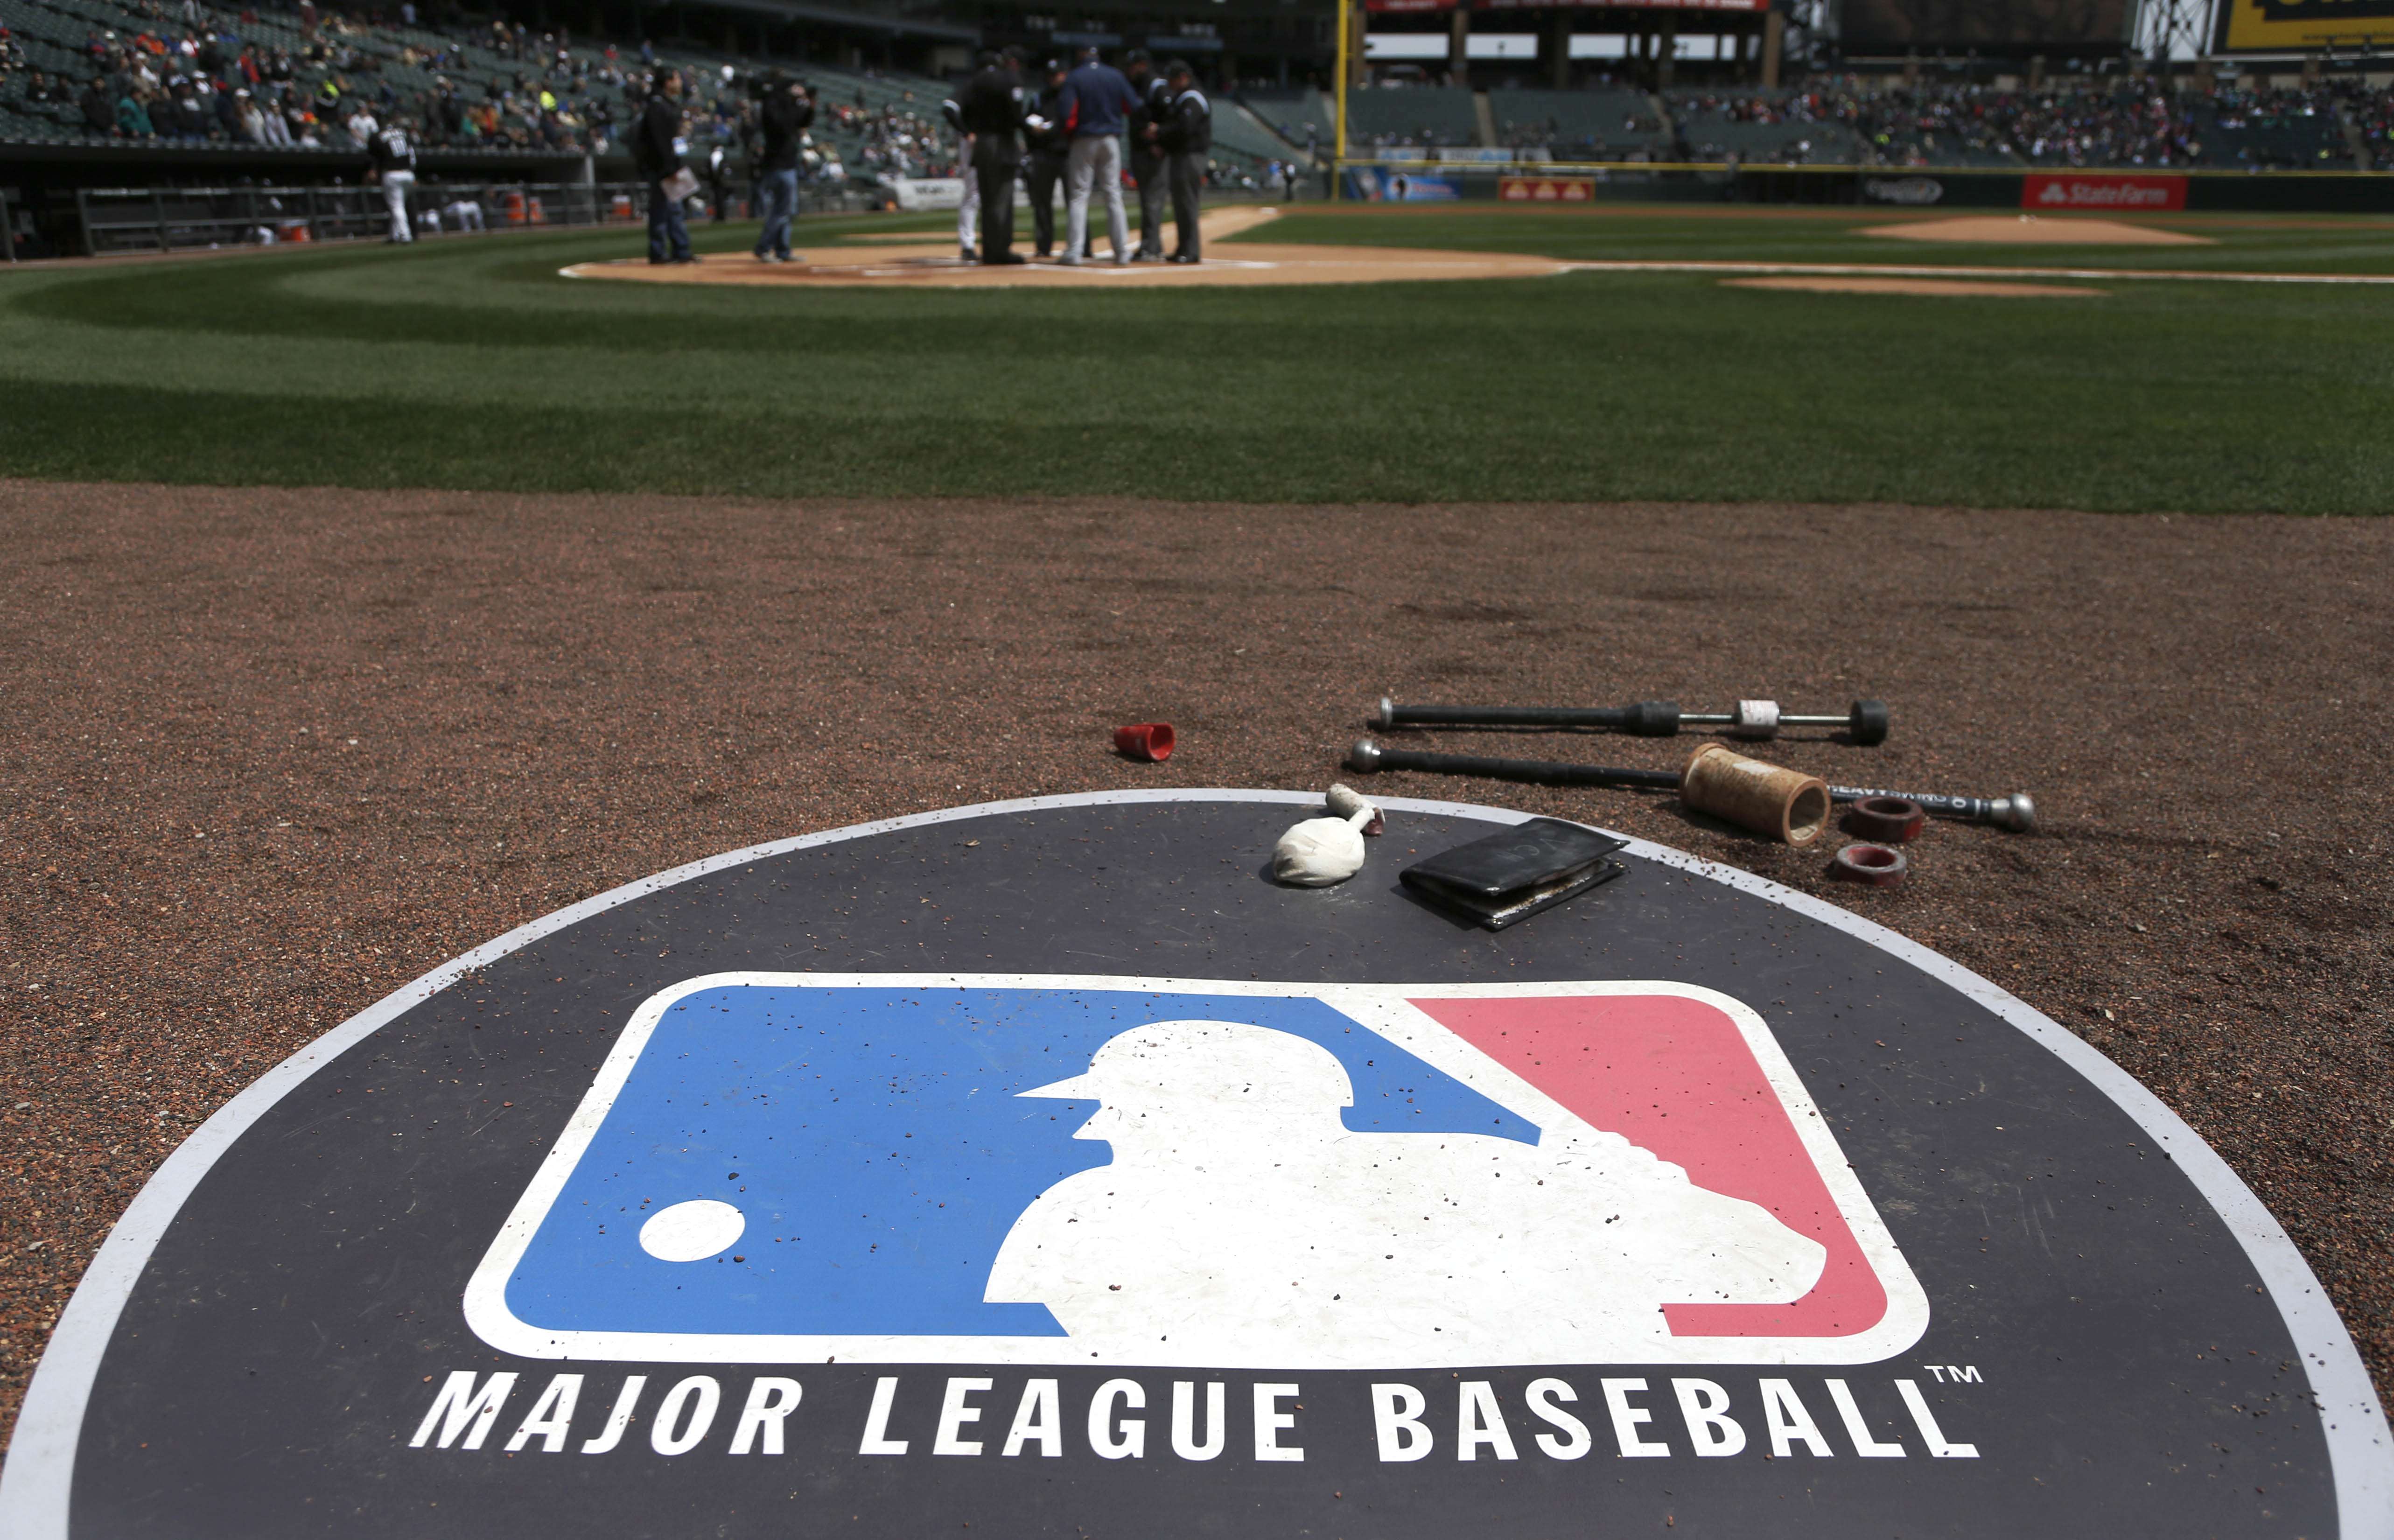 Mlb 2022 Opening Day Schedule Mlb Announces Complete 2022 Schedule; Opening Day Set For March 31 |  Bleacher Report | Latest News, Videos And Highlights